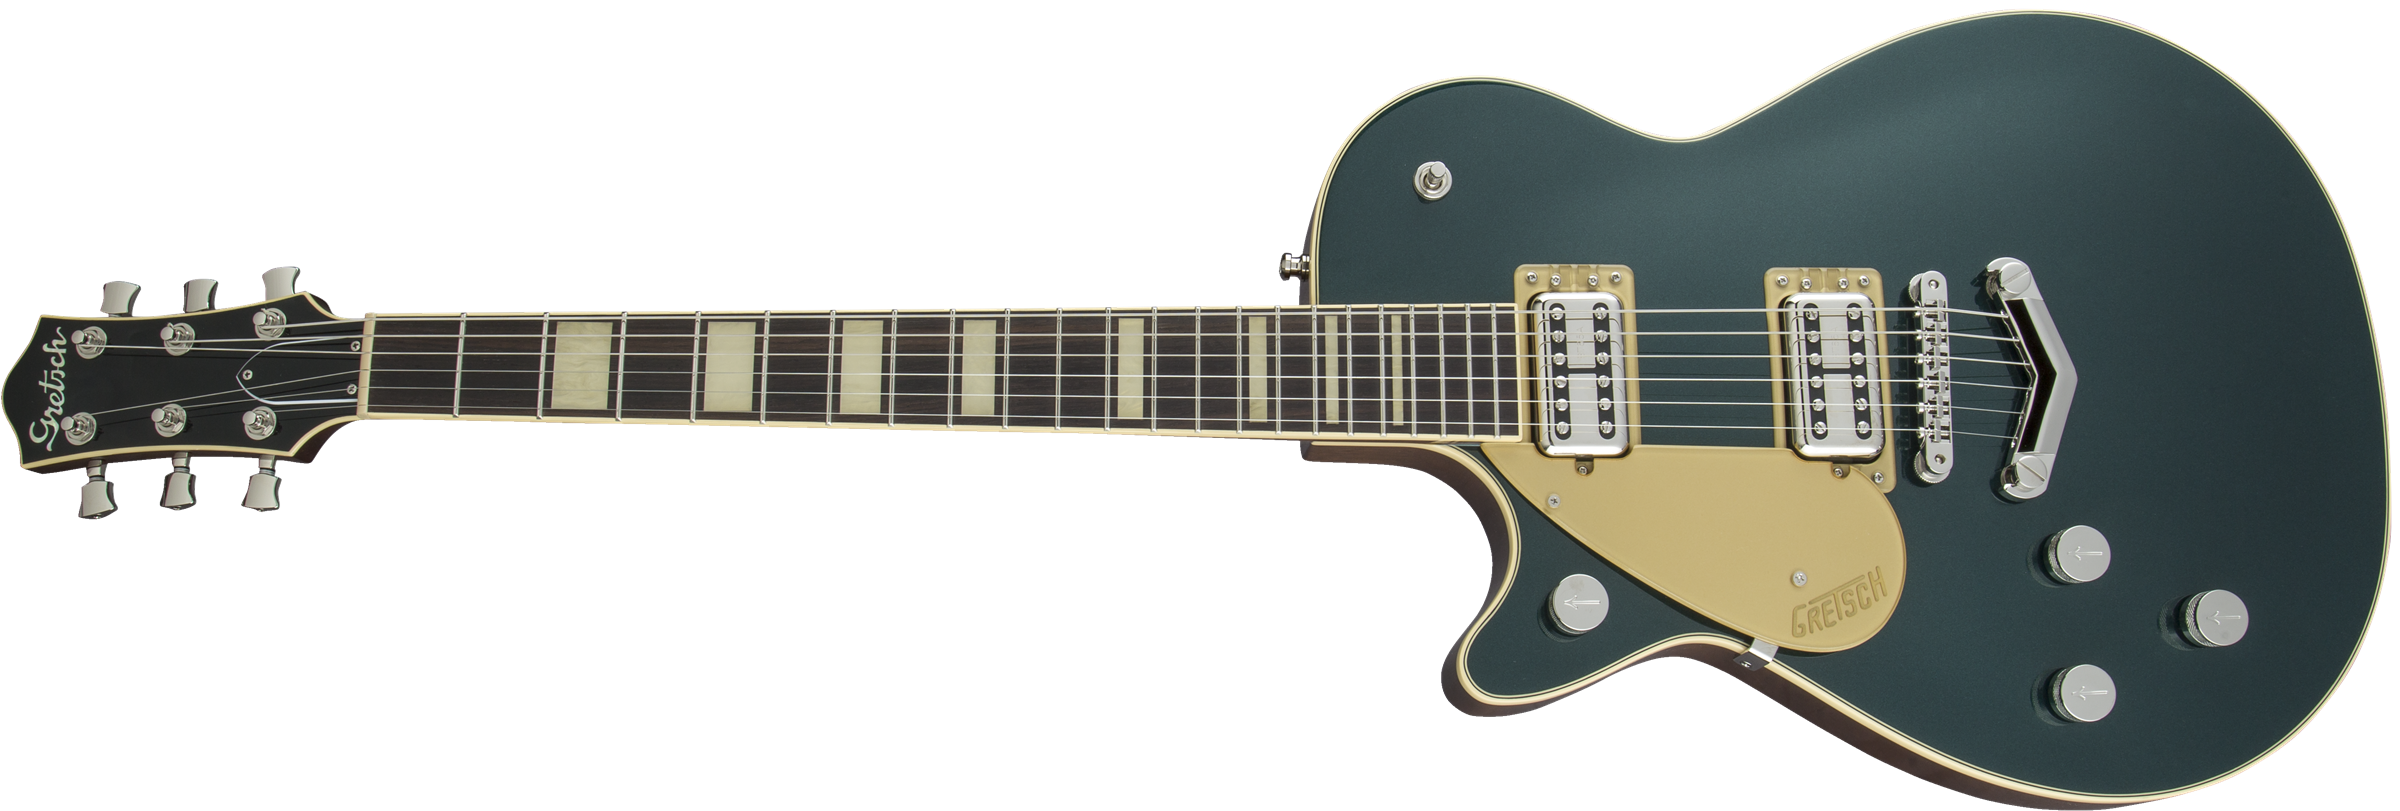 Gretsch G6228 Players Edition Jet BT Left-Handed Electric Guitar - Cadillac Green